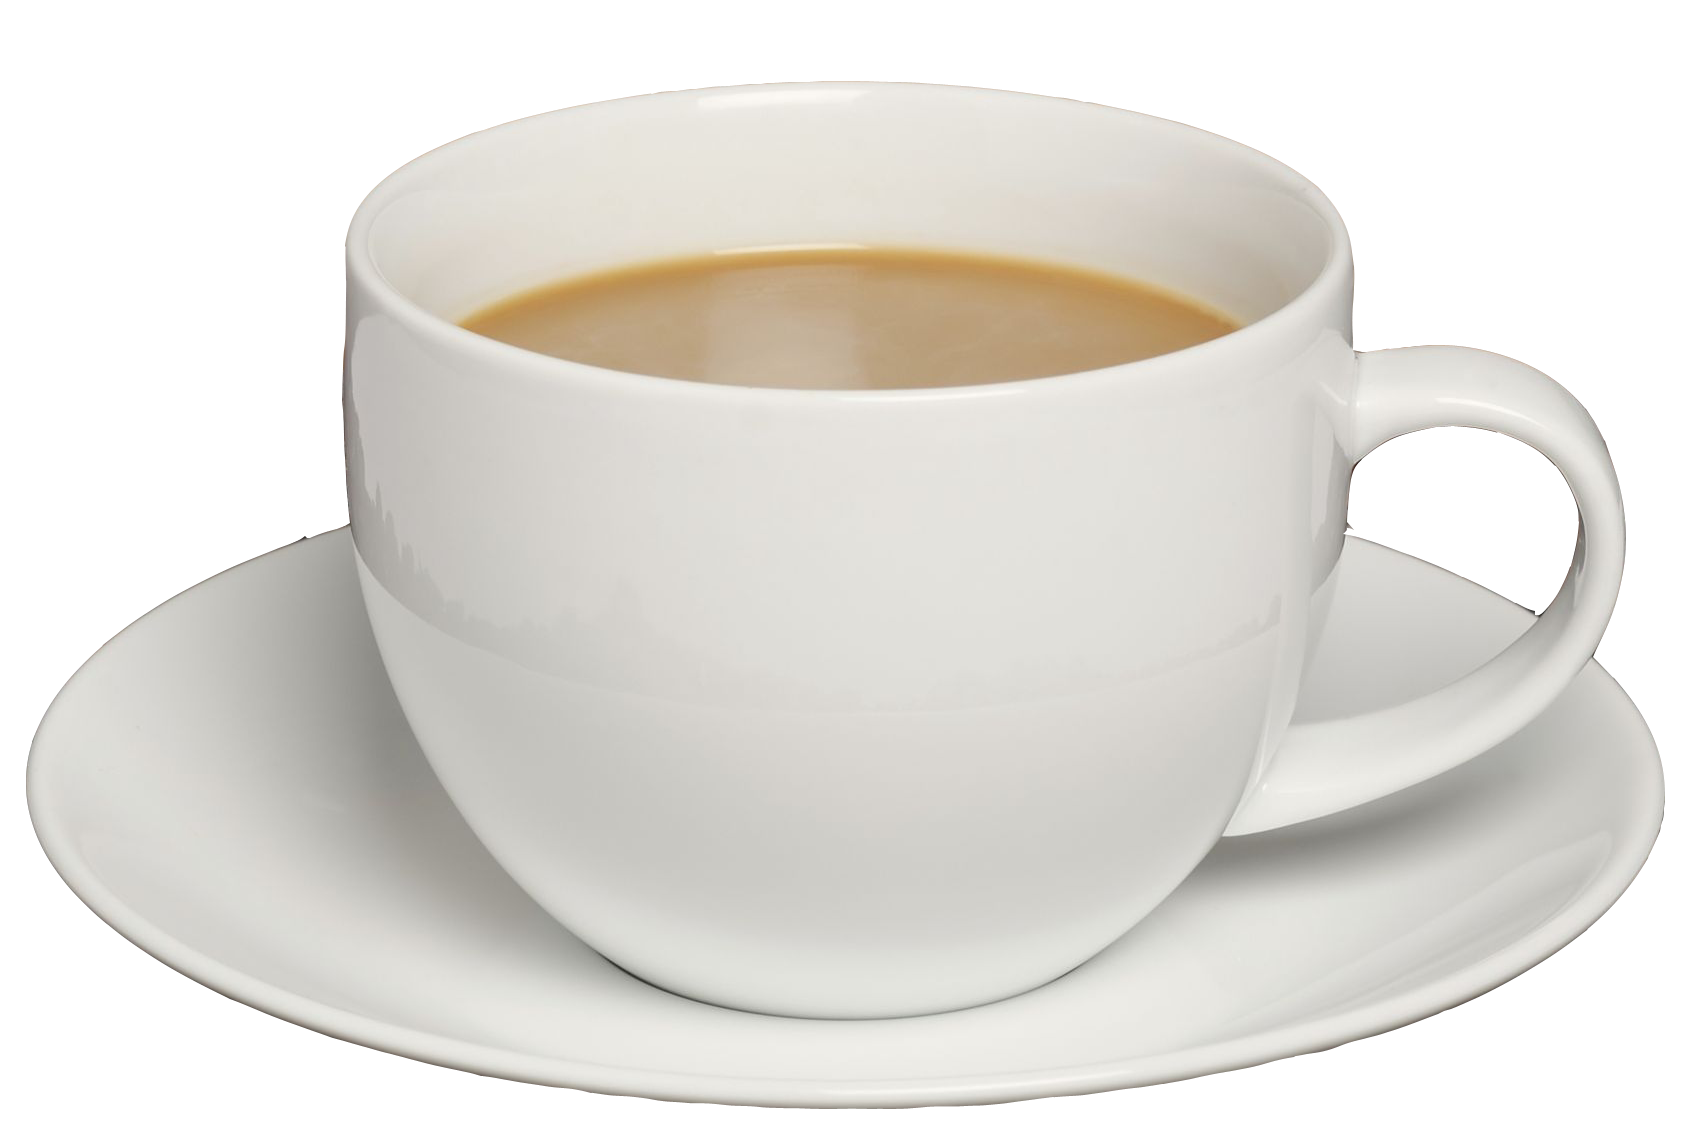 Cup Coffee Png - Cup Of Coffee, Transparent background PNG HD thumbnail